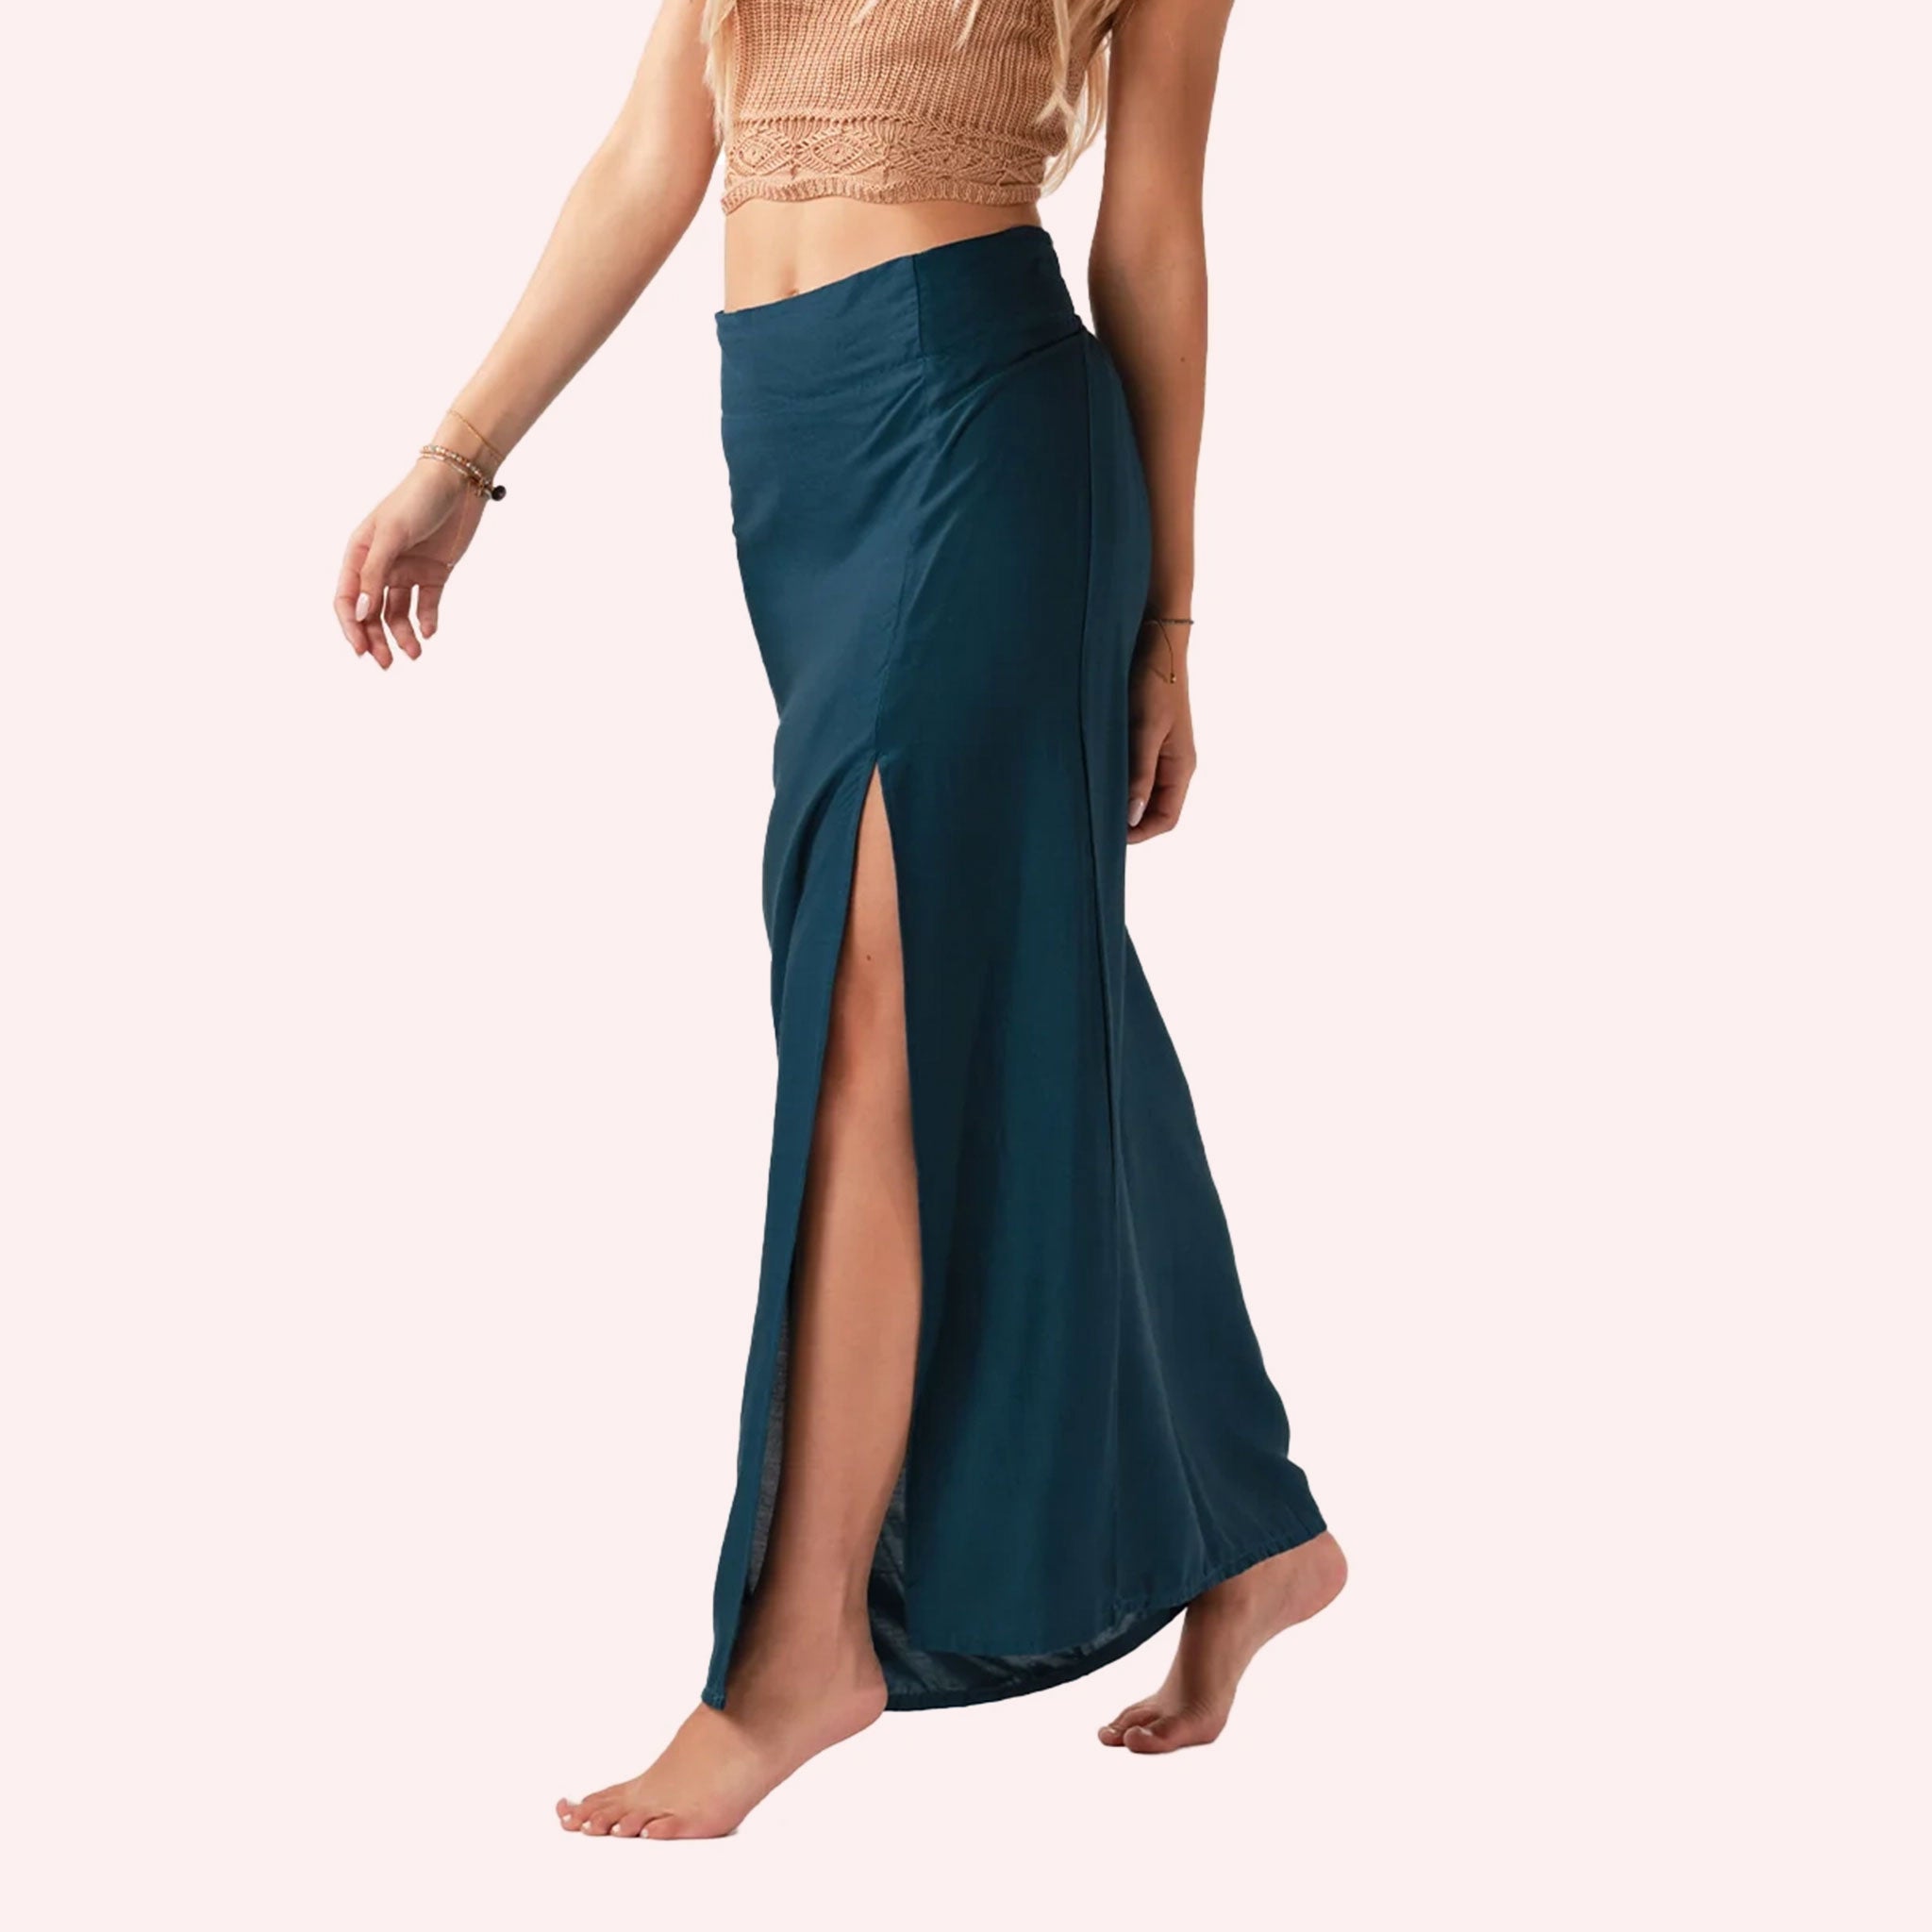 On a neutral background is a teal maxi skirt with a slit on the front side.